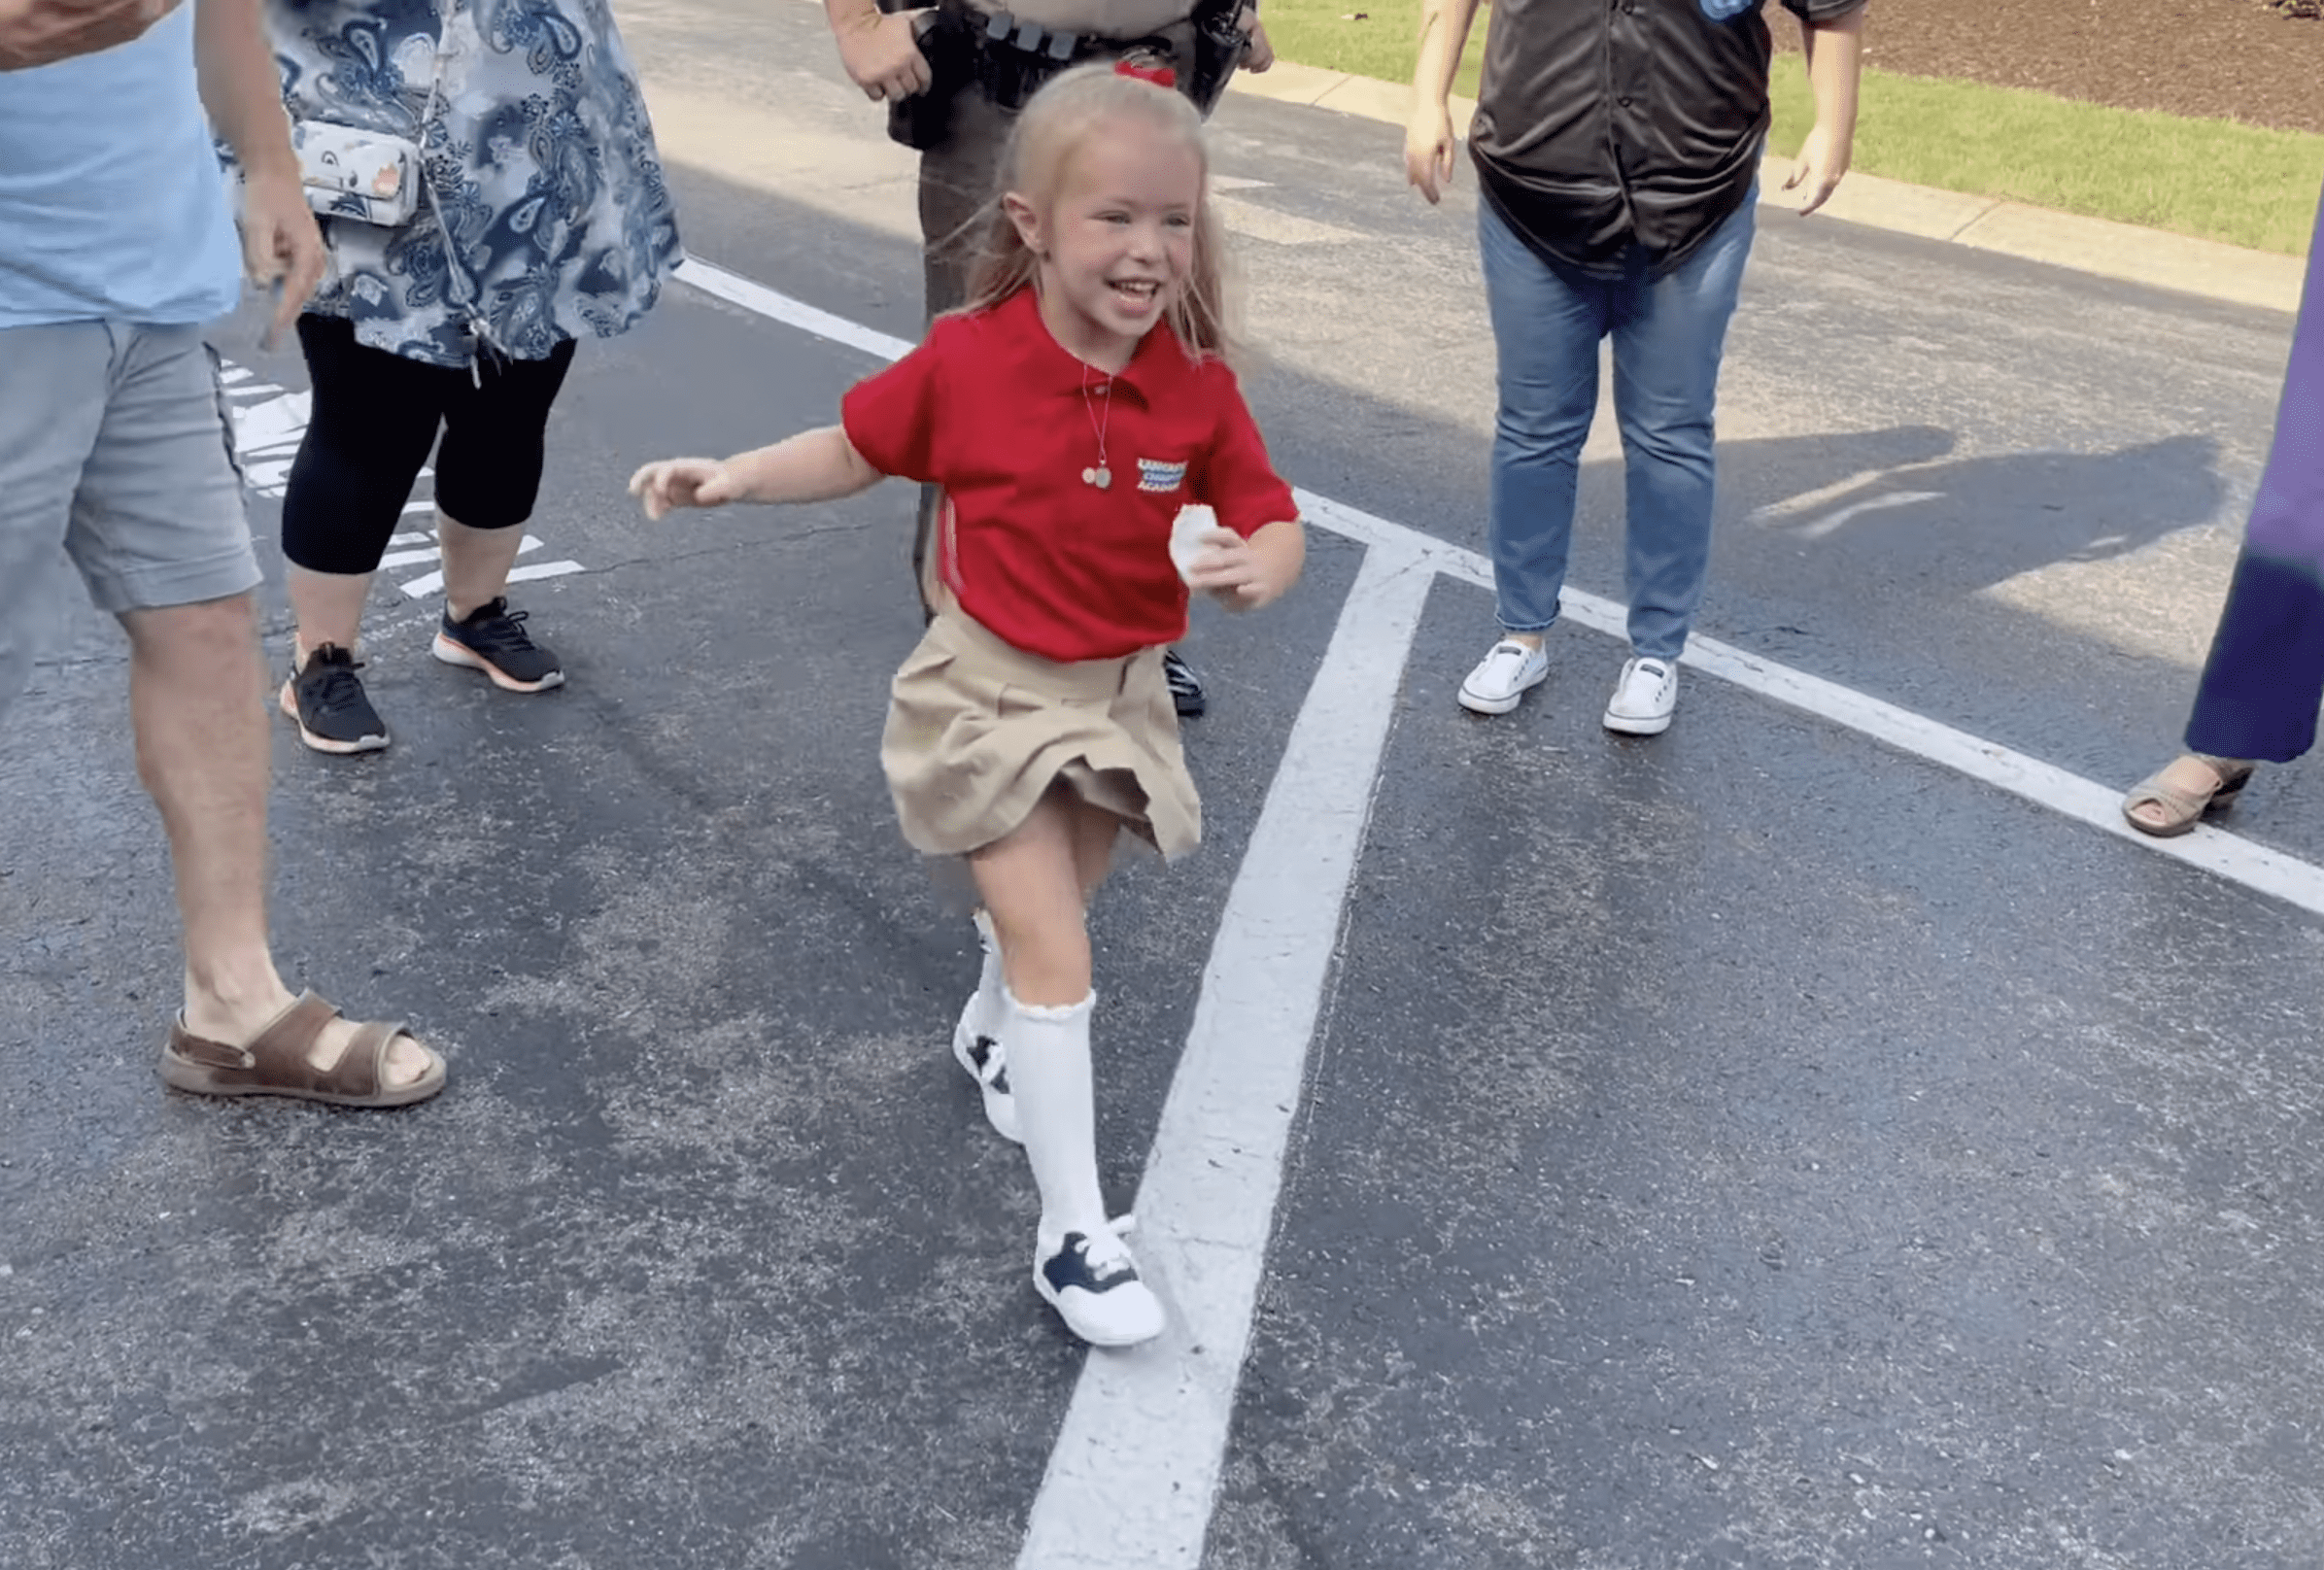 Anna Stolinsky running to give the cops a high five as she walked down the line. | Source: Facebook.com/La Vergne Police Department